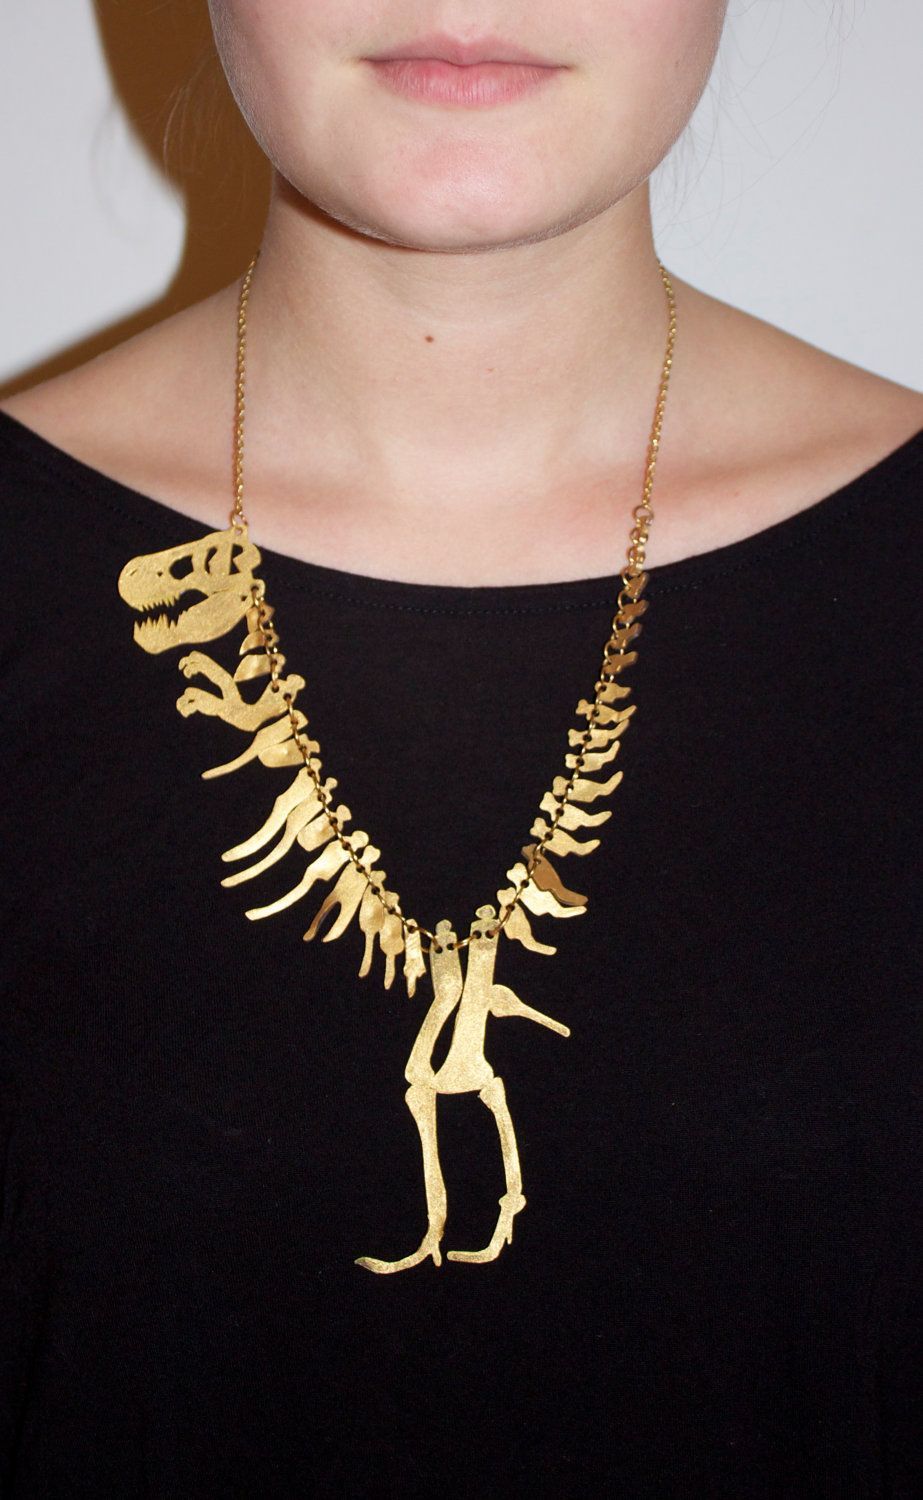 Prehistoric necklace by the Frolovas